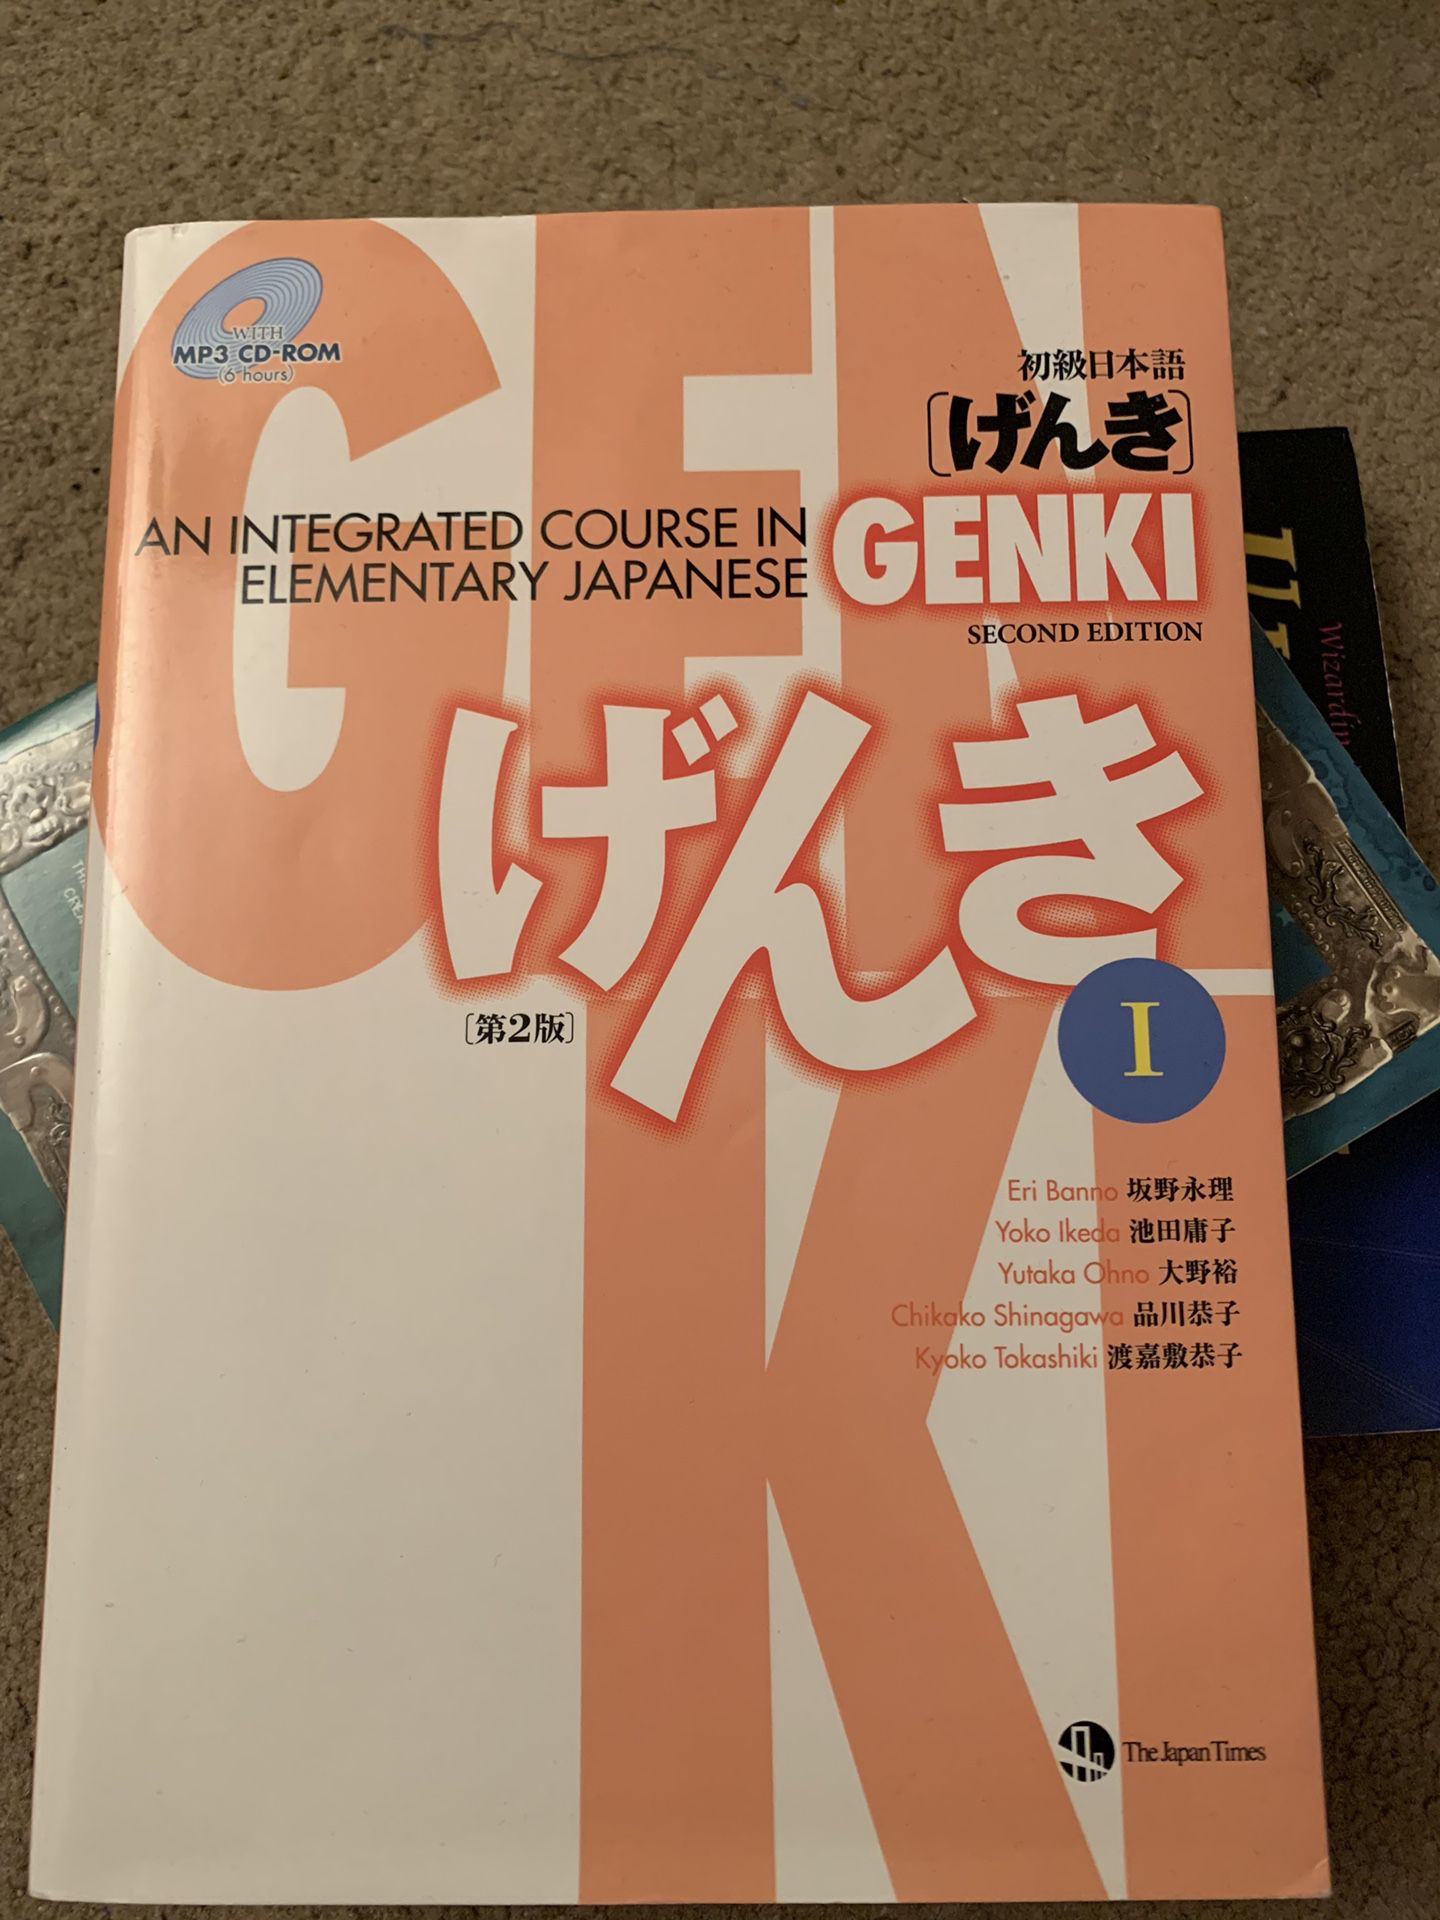 An integrated Course in Elementary Japanese 2nd edition”